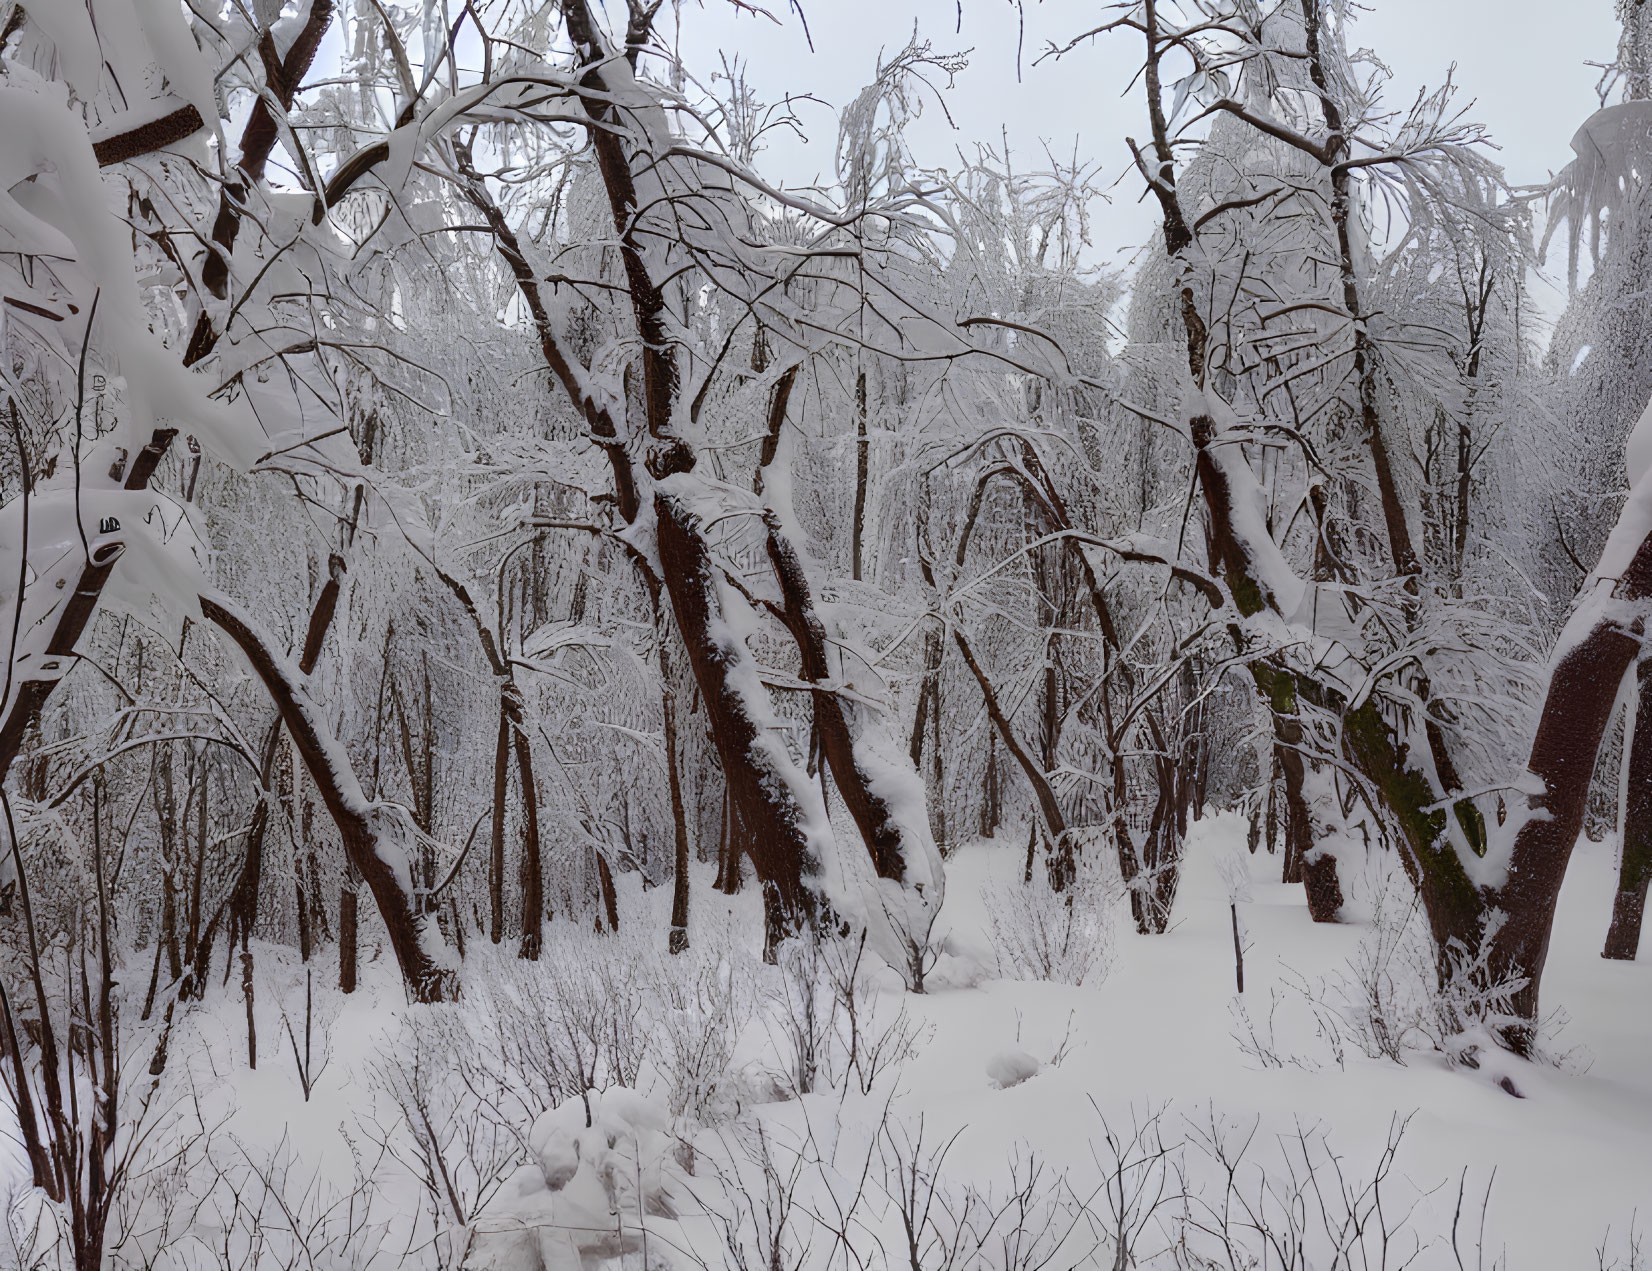 Snow-covered leafless trees in dense winter forest